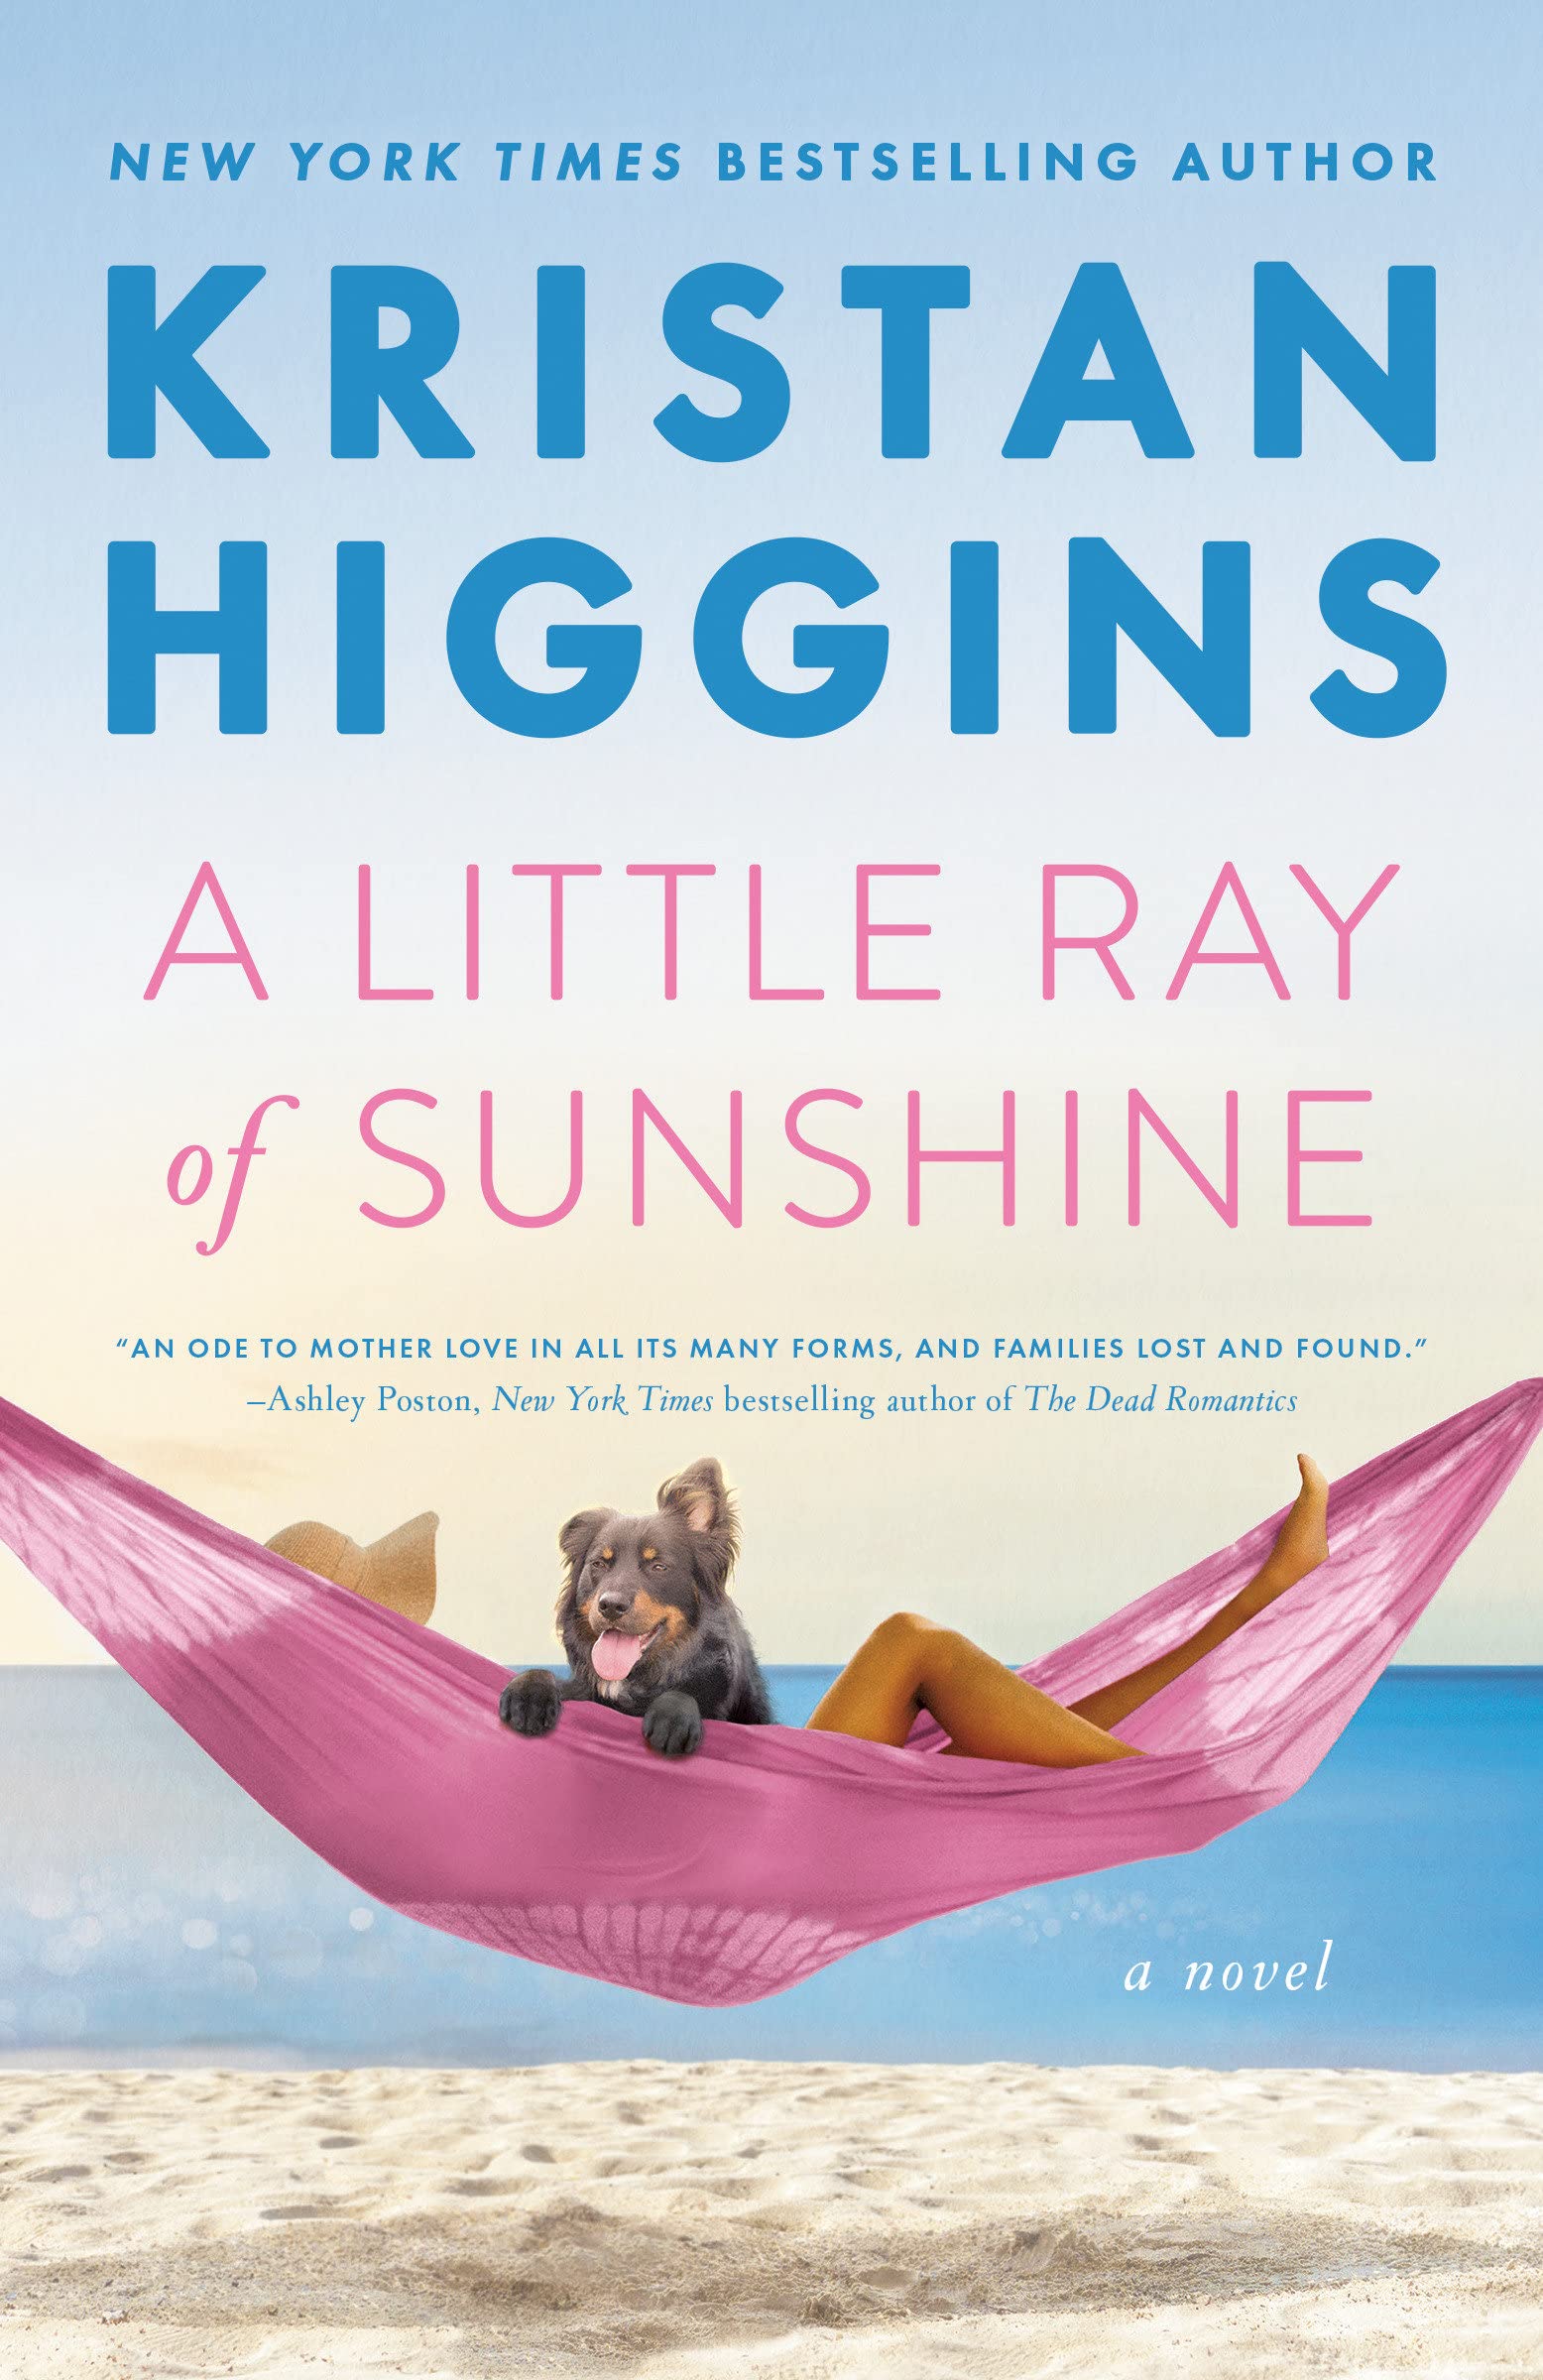  Image for "A Little Ray of Sunshine"